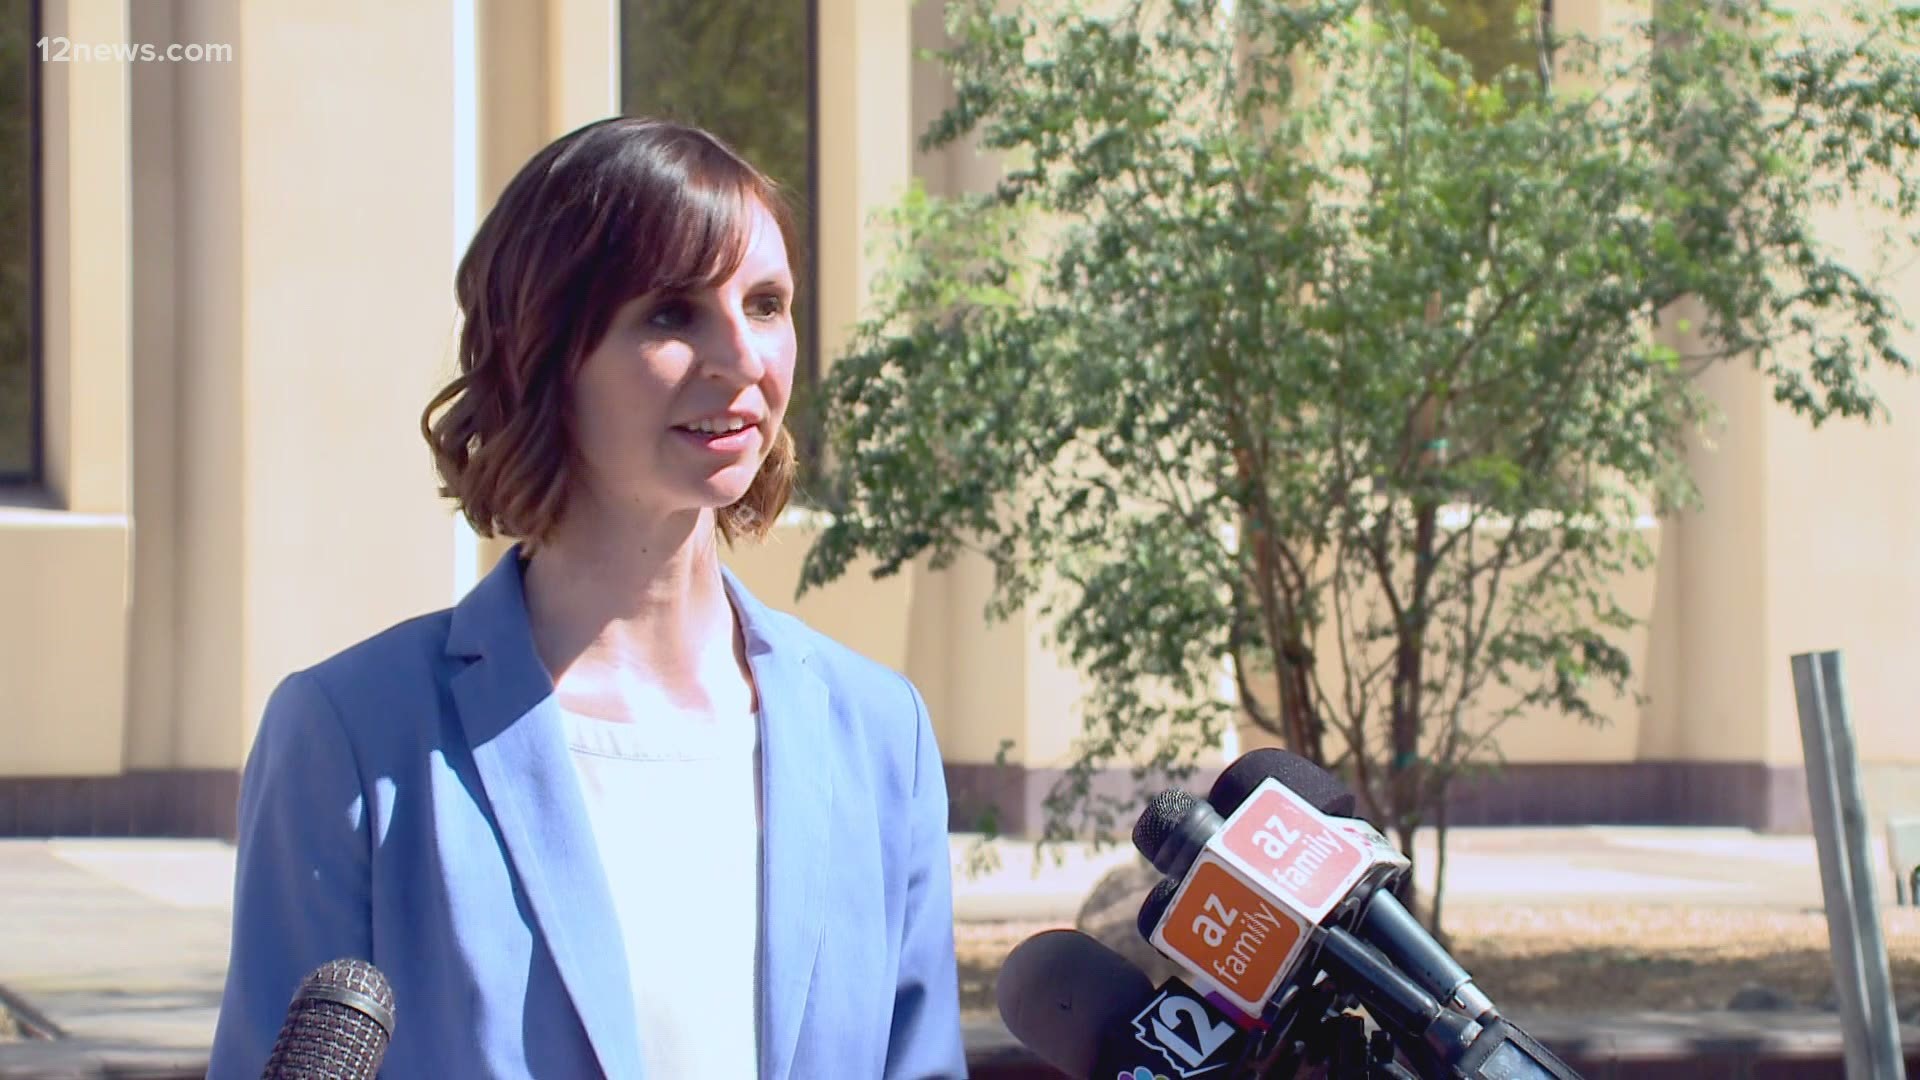 Arizona Superintendent of Public Instruction Kathy Hoffman held a press conference on safely reopening schools. She said the vaccine is making a difference.